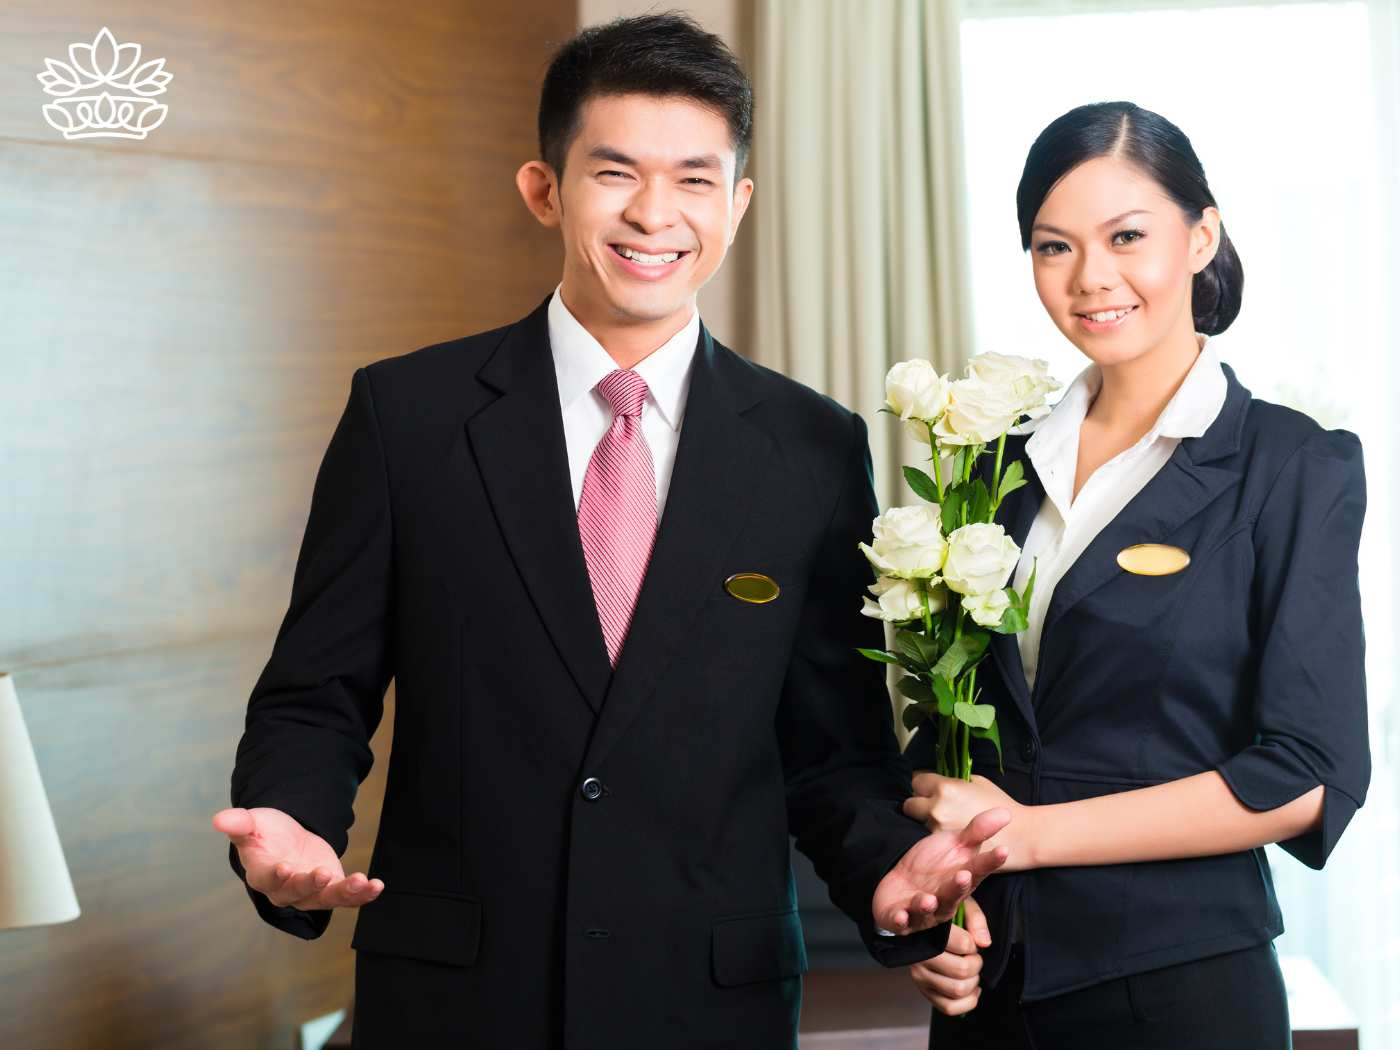 Welcoming hotel staff, a male and a female, in professional attire, greet guests warmly. The man, wearing a suit and red tie, gestures invitingly, while the woman holds a bouquet of fresh white roses, symbolizing exceptional hospitality and care. Fabulous Flowers and Gifts for Guest House and Hotel Flowers"